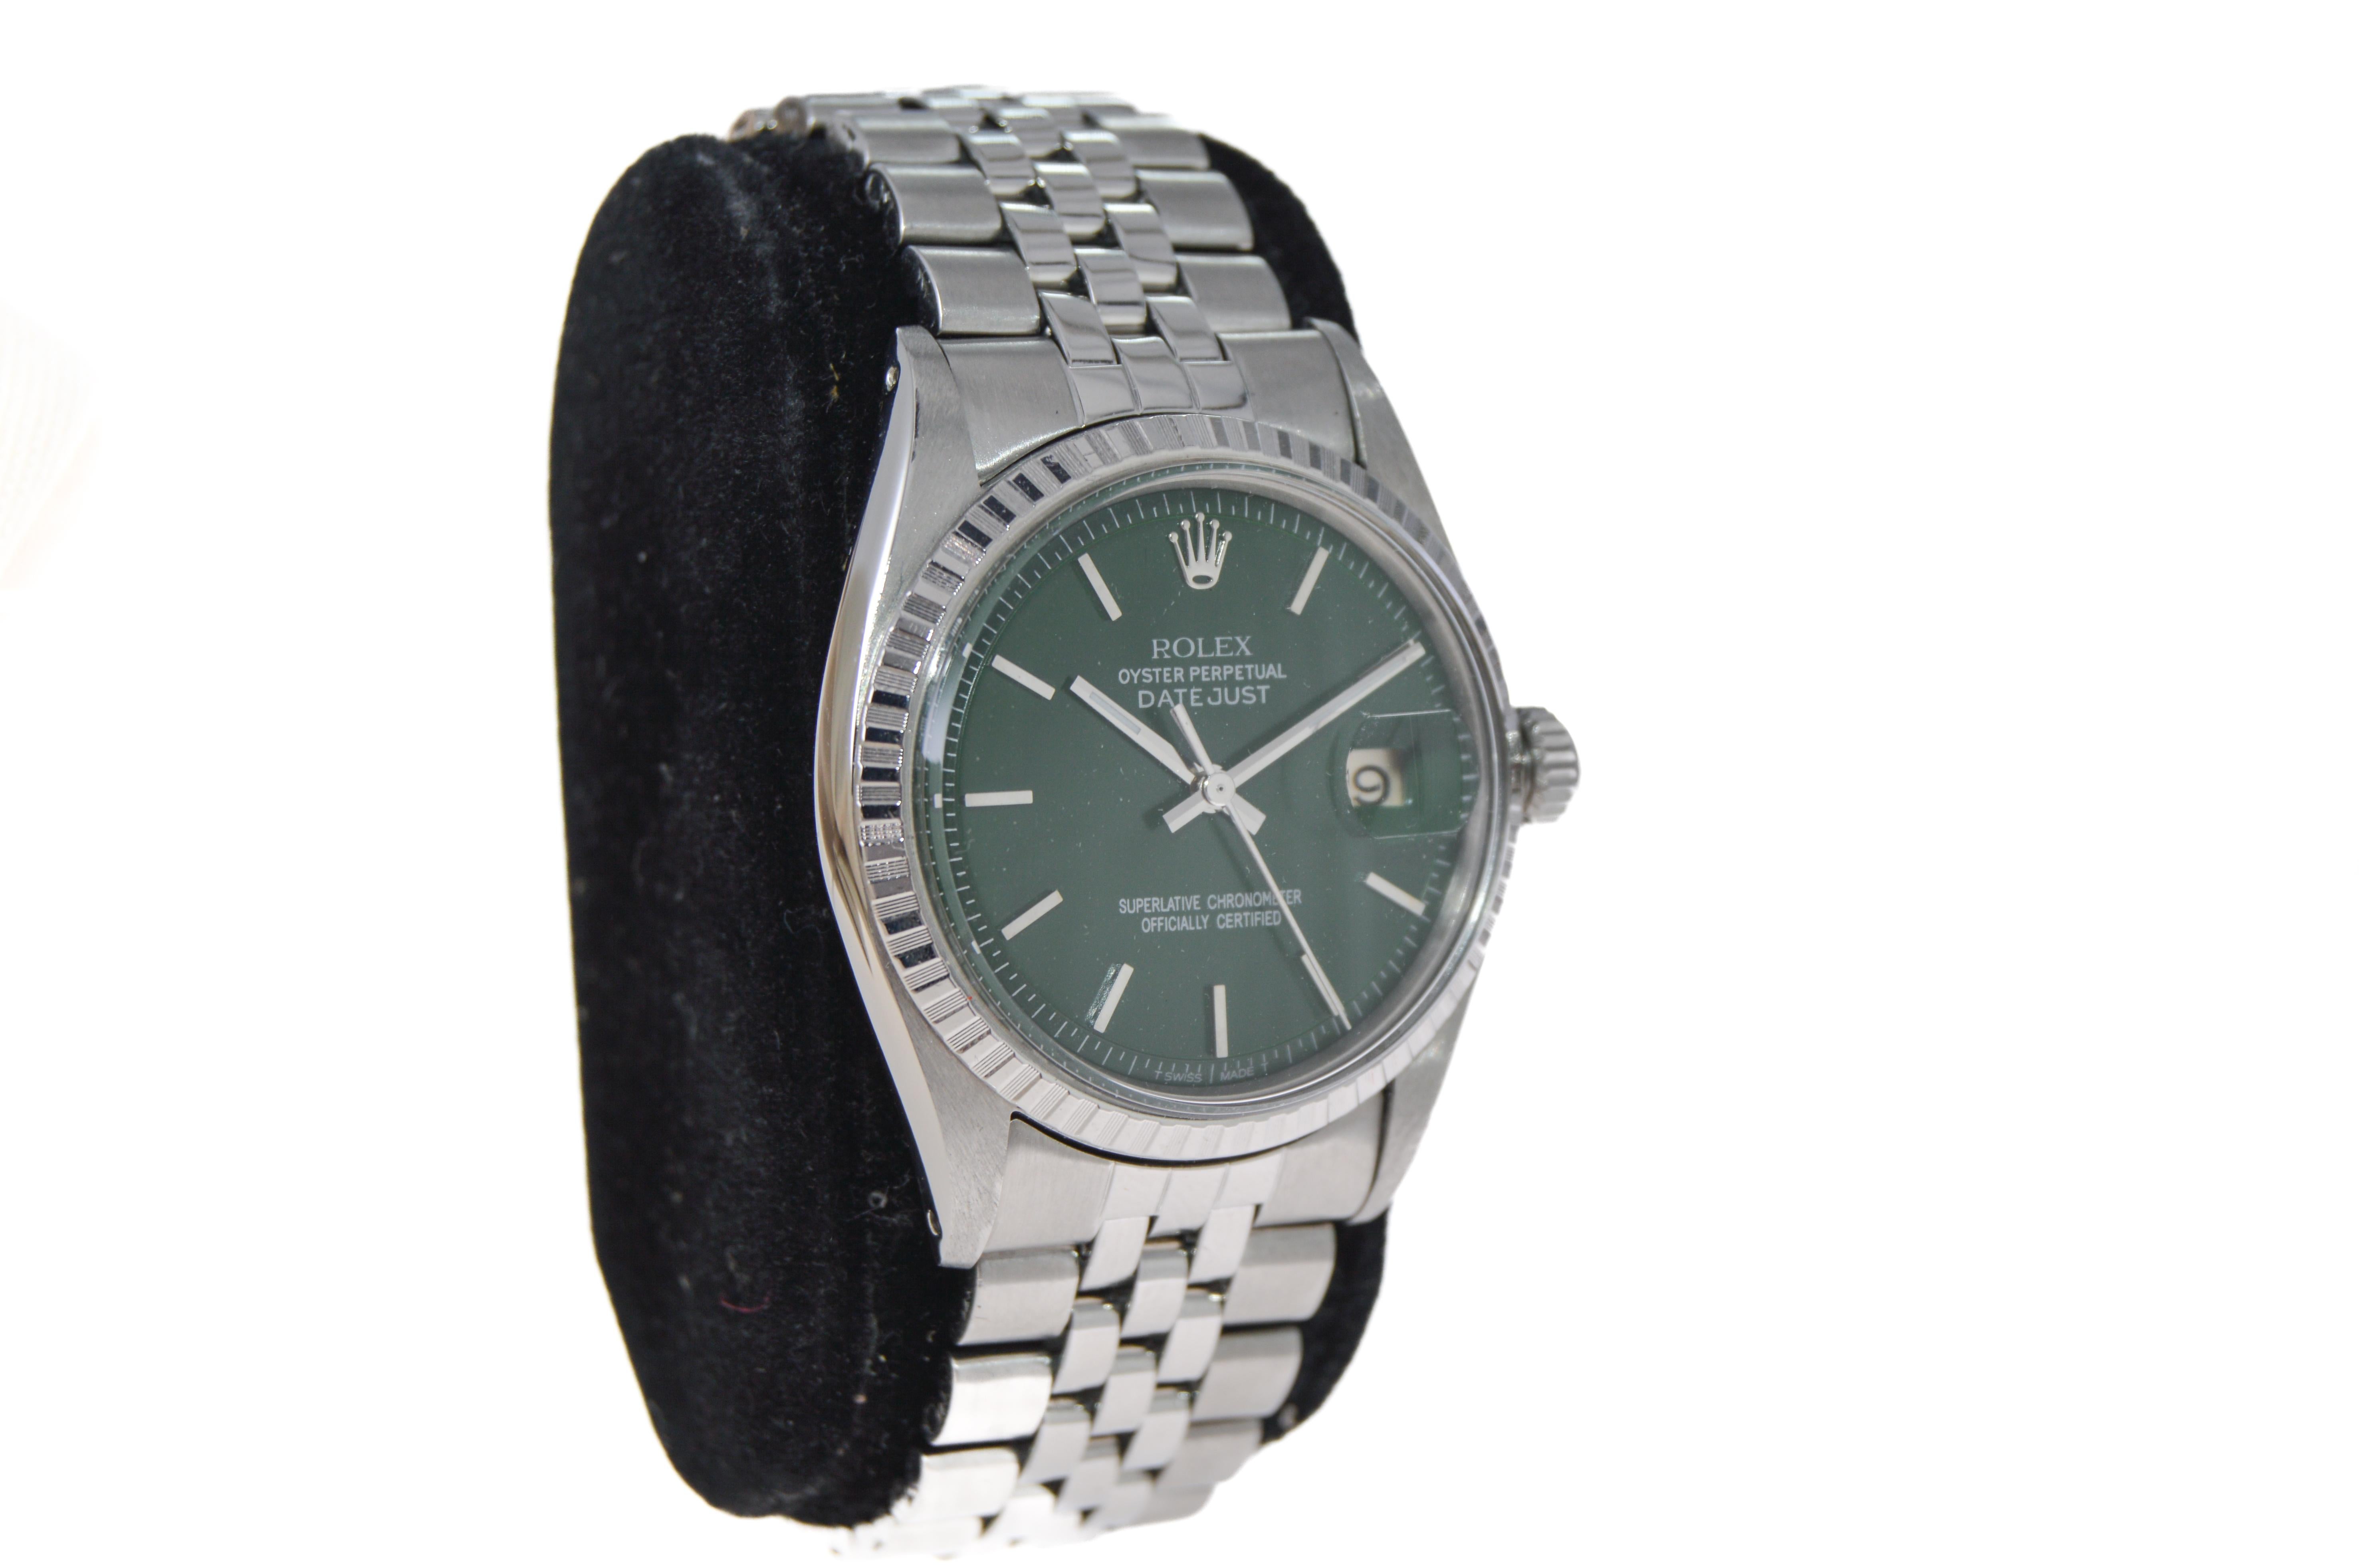 FACTORY / HOUSE: Rolex Watch Company
STYLE / REFERENCE: Oyster Perpetual Datejust / Reference 1603
METAL / MATERIAL: Stainless Steel
CIRCA / YEAR: 1960's
DIMENSIONS / SIZE: Length 44mm X Diameter 36mm
MOVEMENT / CALIBER: Perpetual Winding / 26